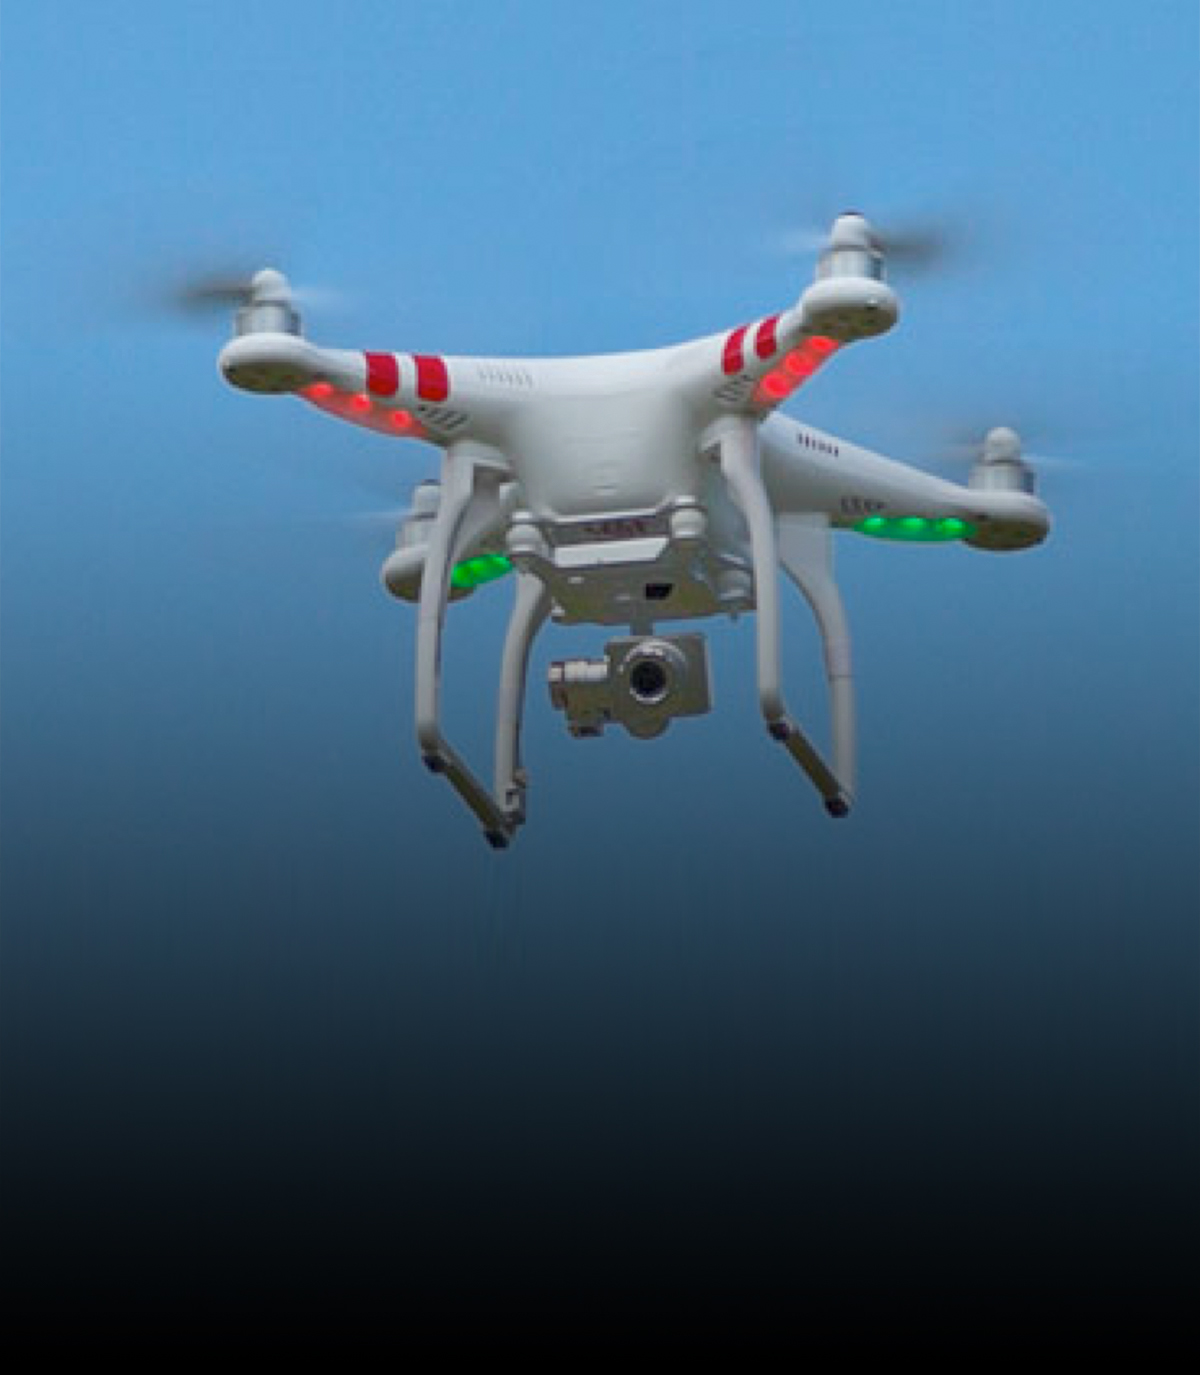 Unmanned aerial systems